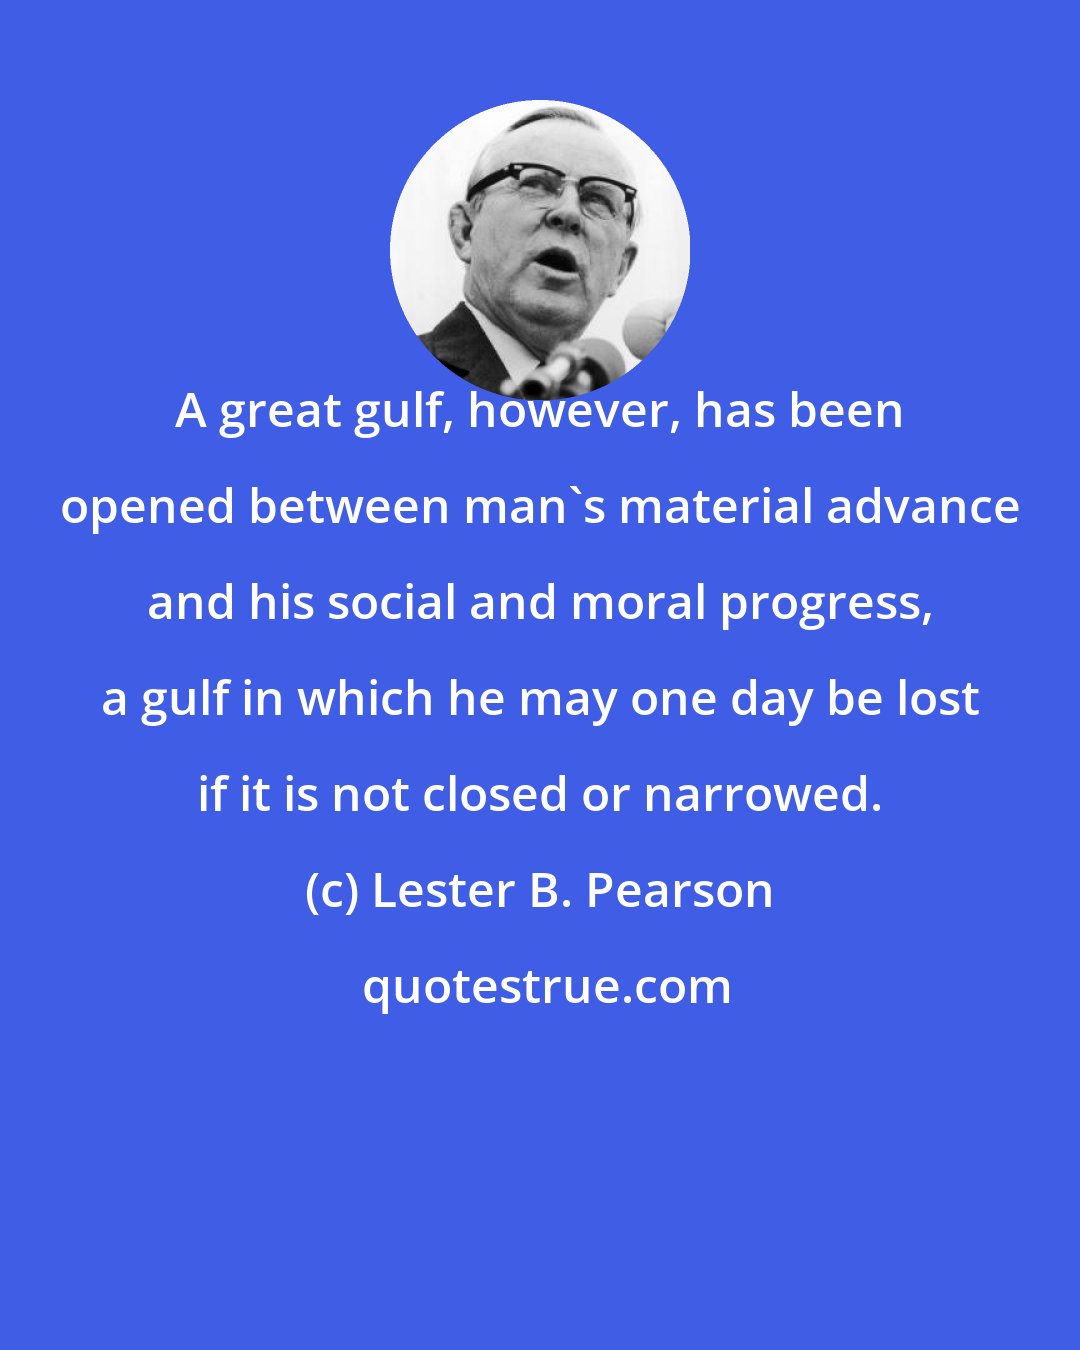 Lester B. Pearson: A great gulf, however, has been opened between man's material advance and his social and moral progress, a gulf in which he may one day be lost if it is not closed or narrowed.